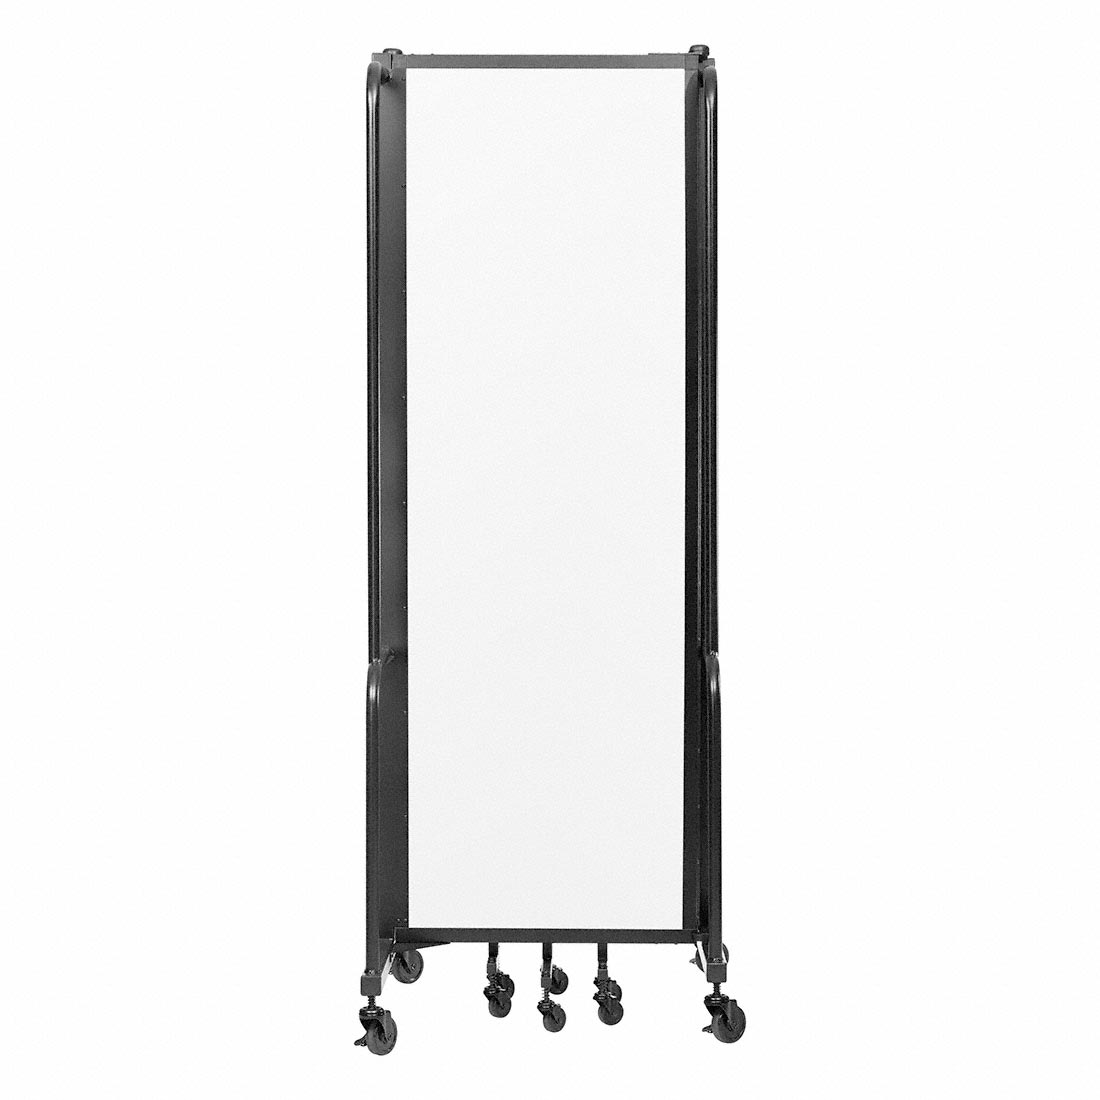 Large 46 Acrylic Divider With Base